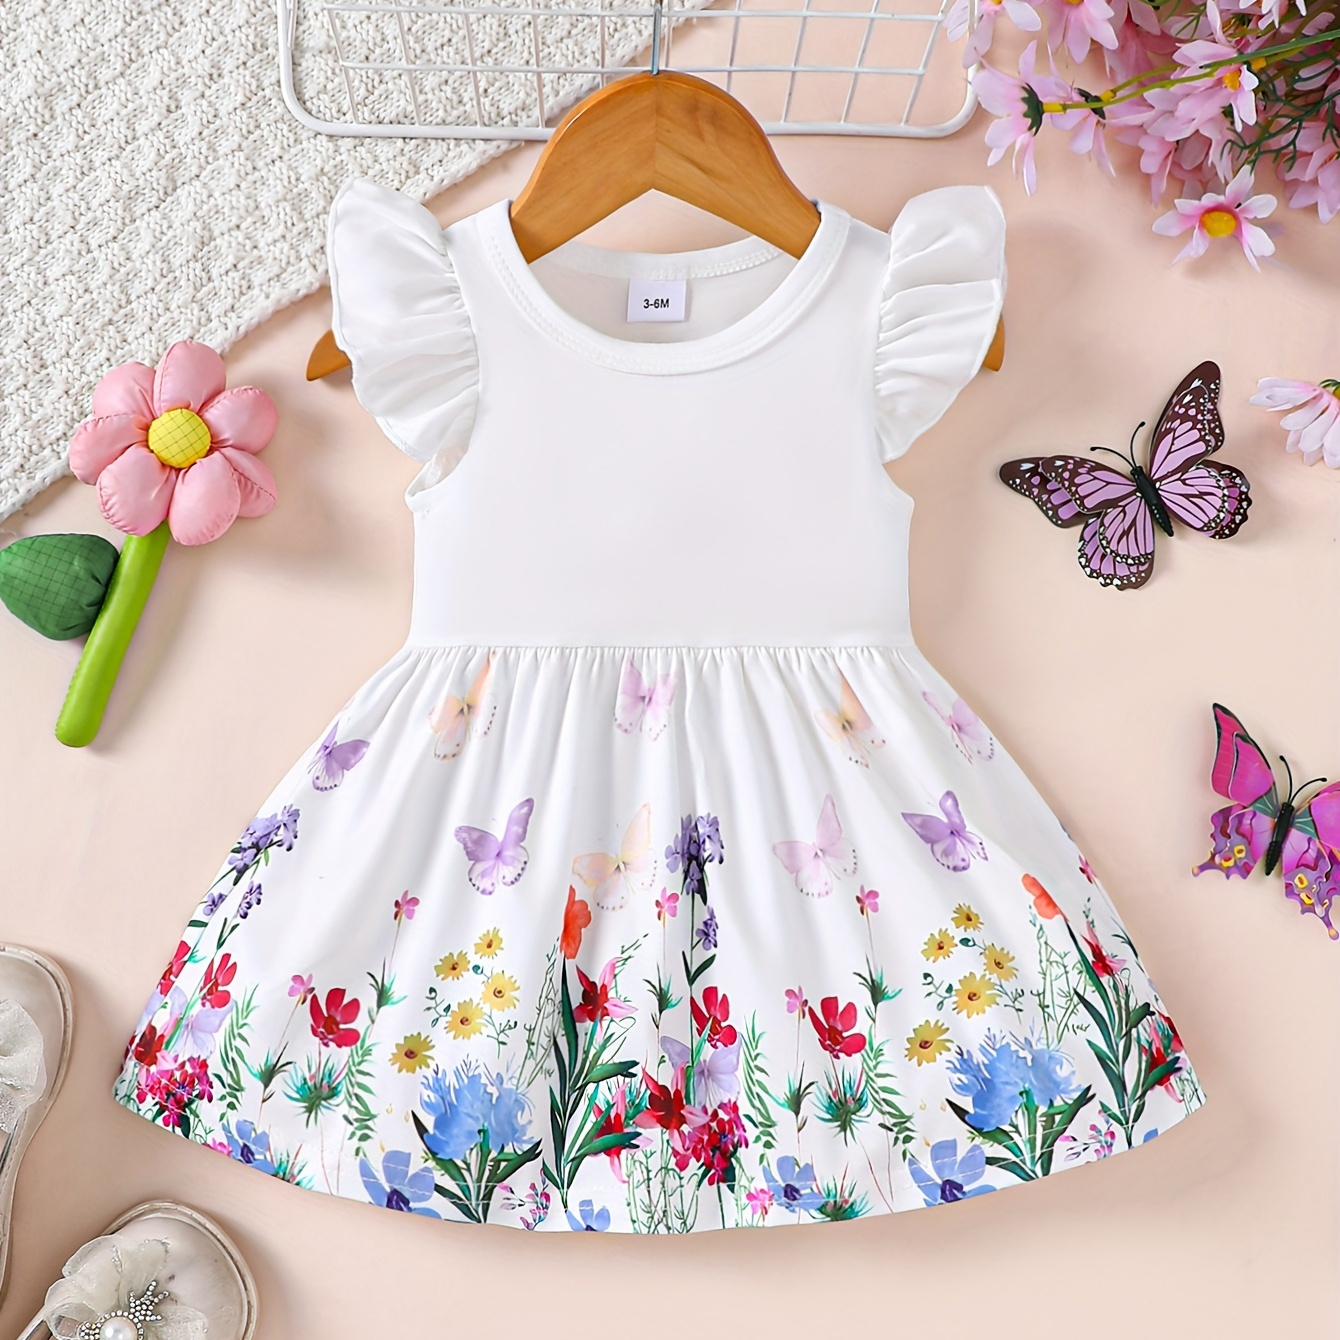 

Baby Girl's Dress, Flying Sleeve Flower And Butterfly Print Dress, Baby's Clothes For Summer